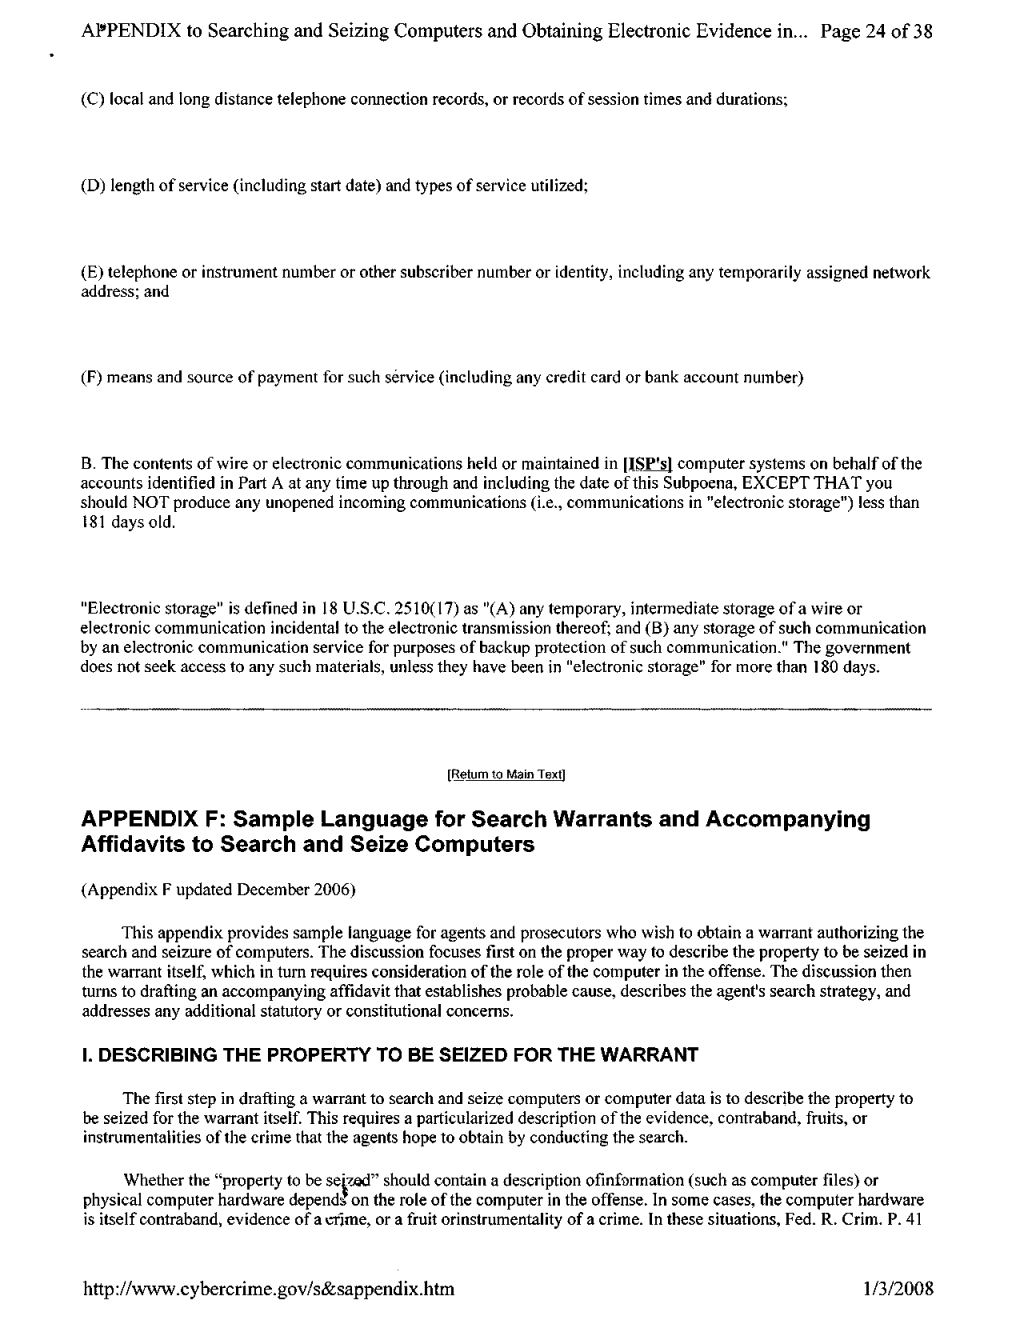 Sample Language for Search Warrants and Accompanying Affidavits to Search and Seize Computers